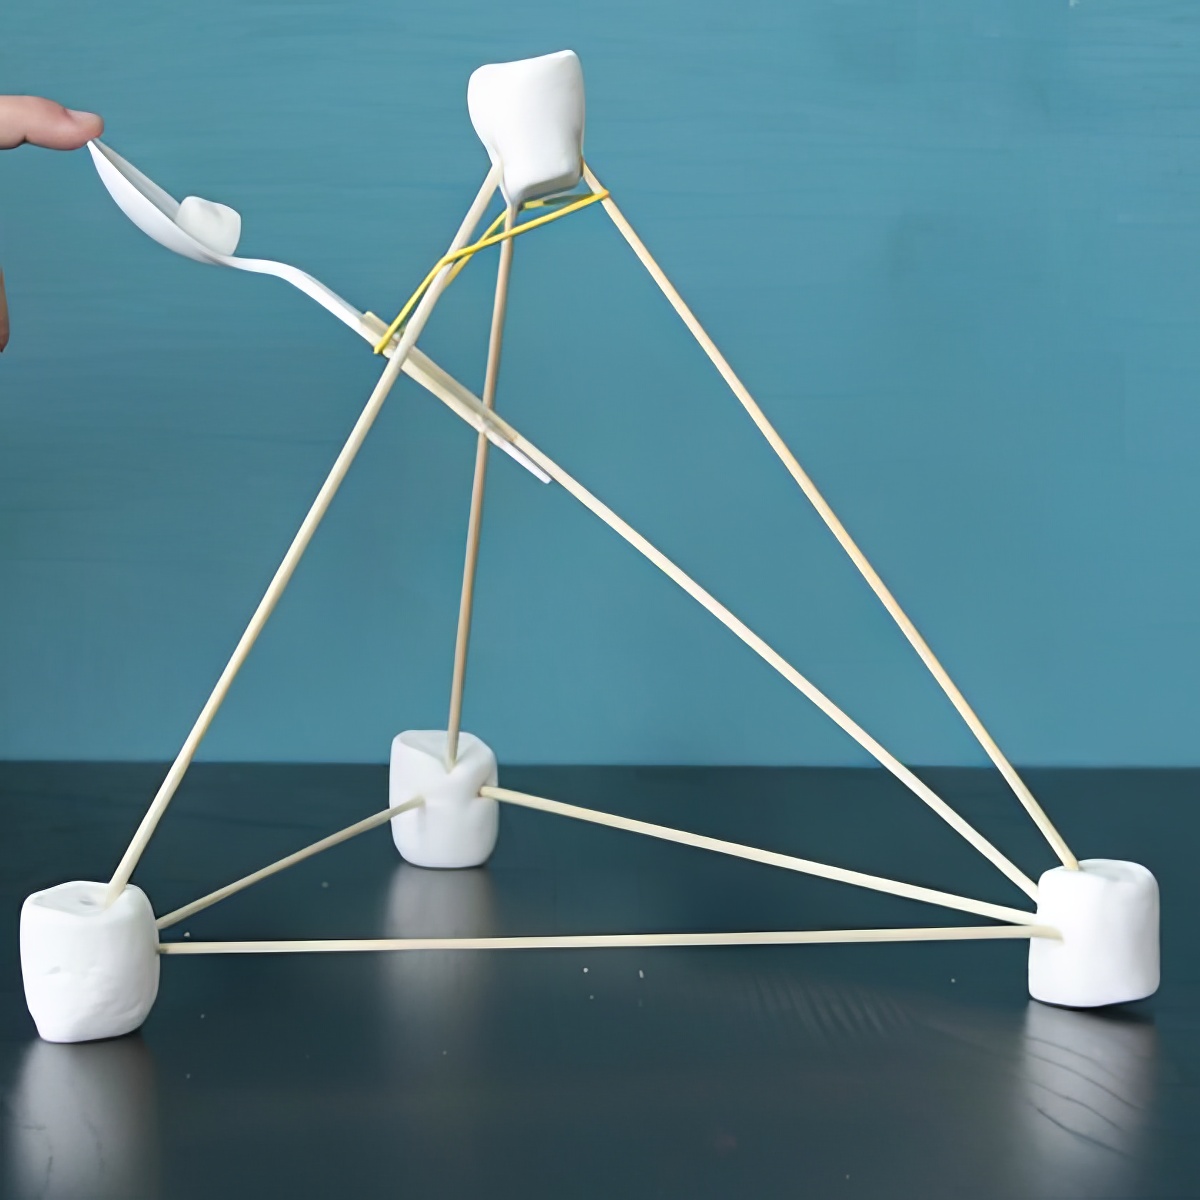 Marshmallow catapult, easy DIY catapult out of marshmallows